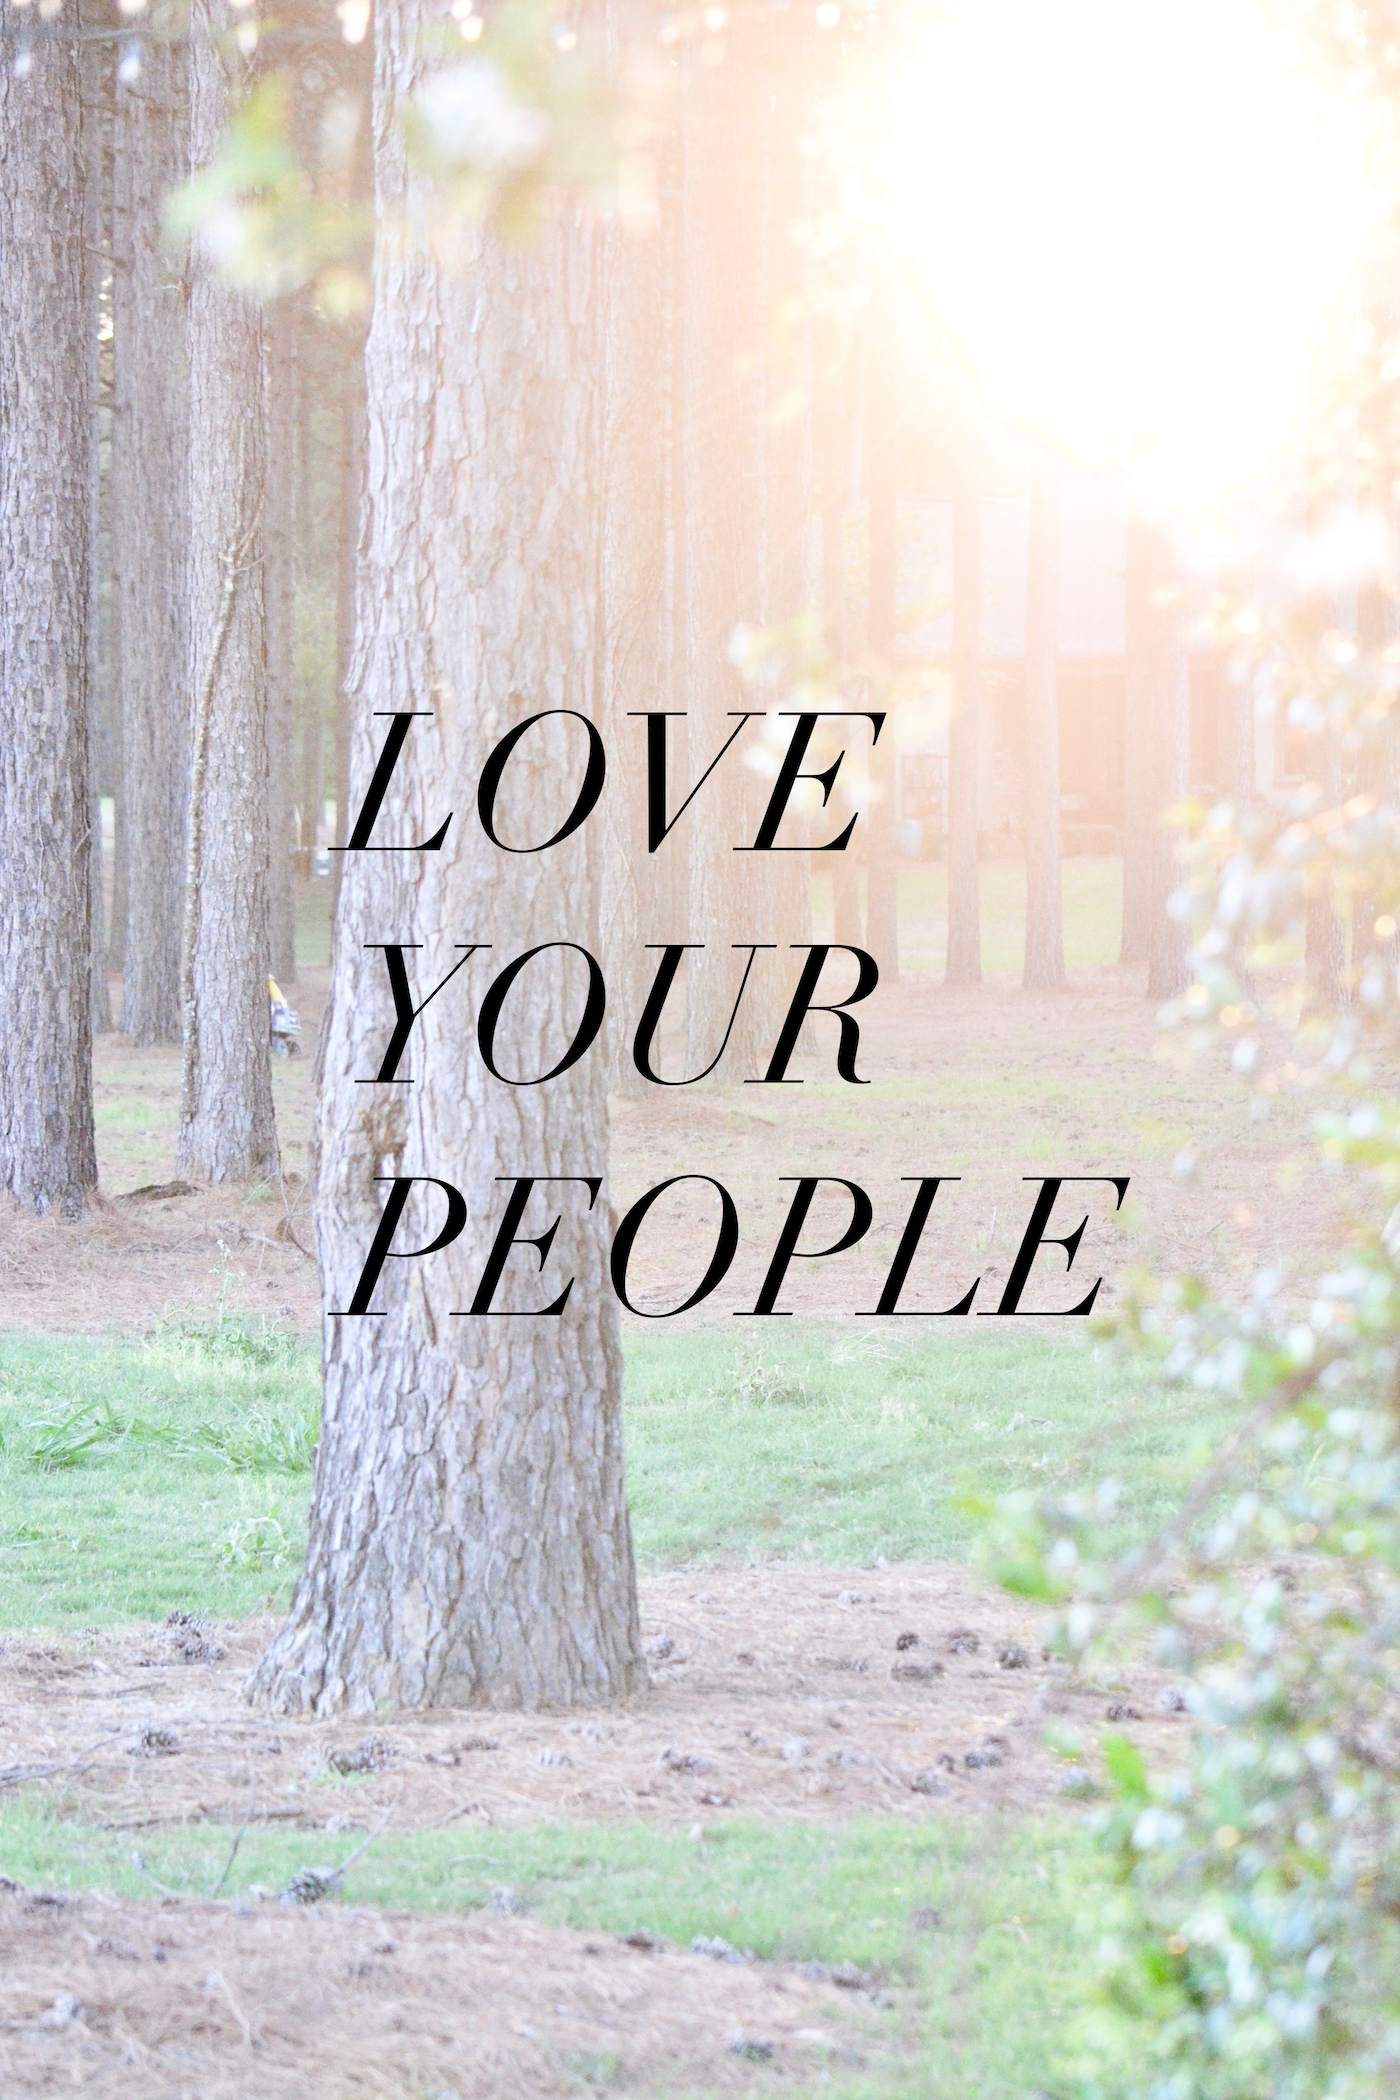 LOVE YOUR PEOPLE